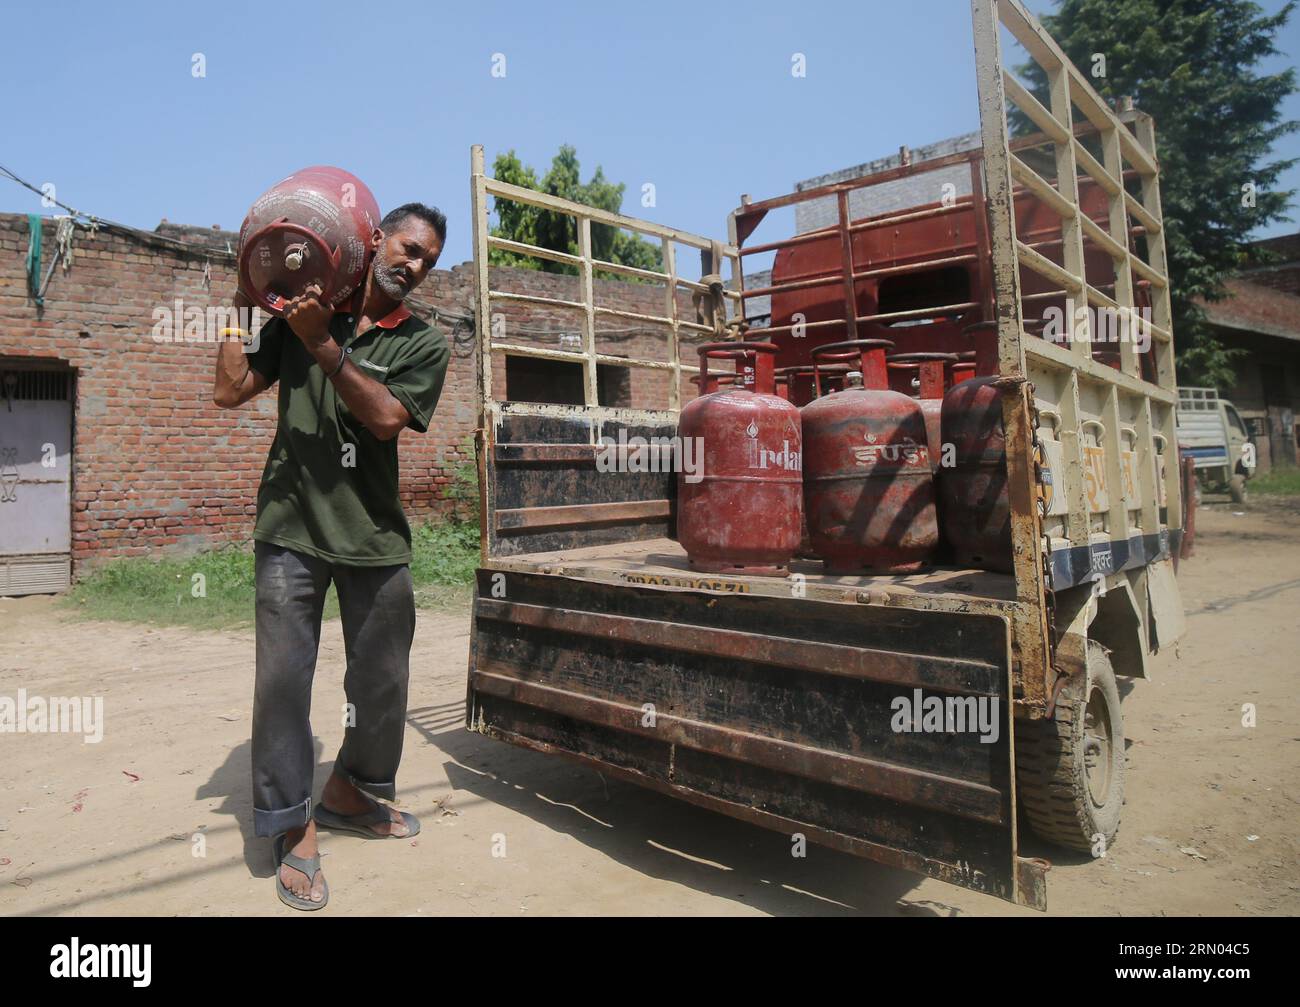 Amritsar. 30th Aug, 2023. A worker delivers cooking gas (LPG) cylinders at a residential area in Amritsar district of India's northern Punjab state Aug. 30, 2023. The Indian government decided on Tuesday to reduce the price of cooking gas (LPG) cylinder used in households by 200 Indian rupees (around 2.42 U.S. dollars) per cylinder, Minister for Information and Broadcasting Anurag Thakur said. Credit: Str/Xinhua/Alamy Live News Stock Photo